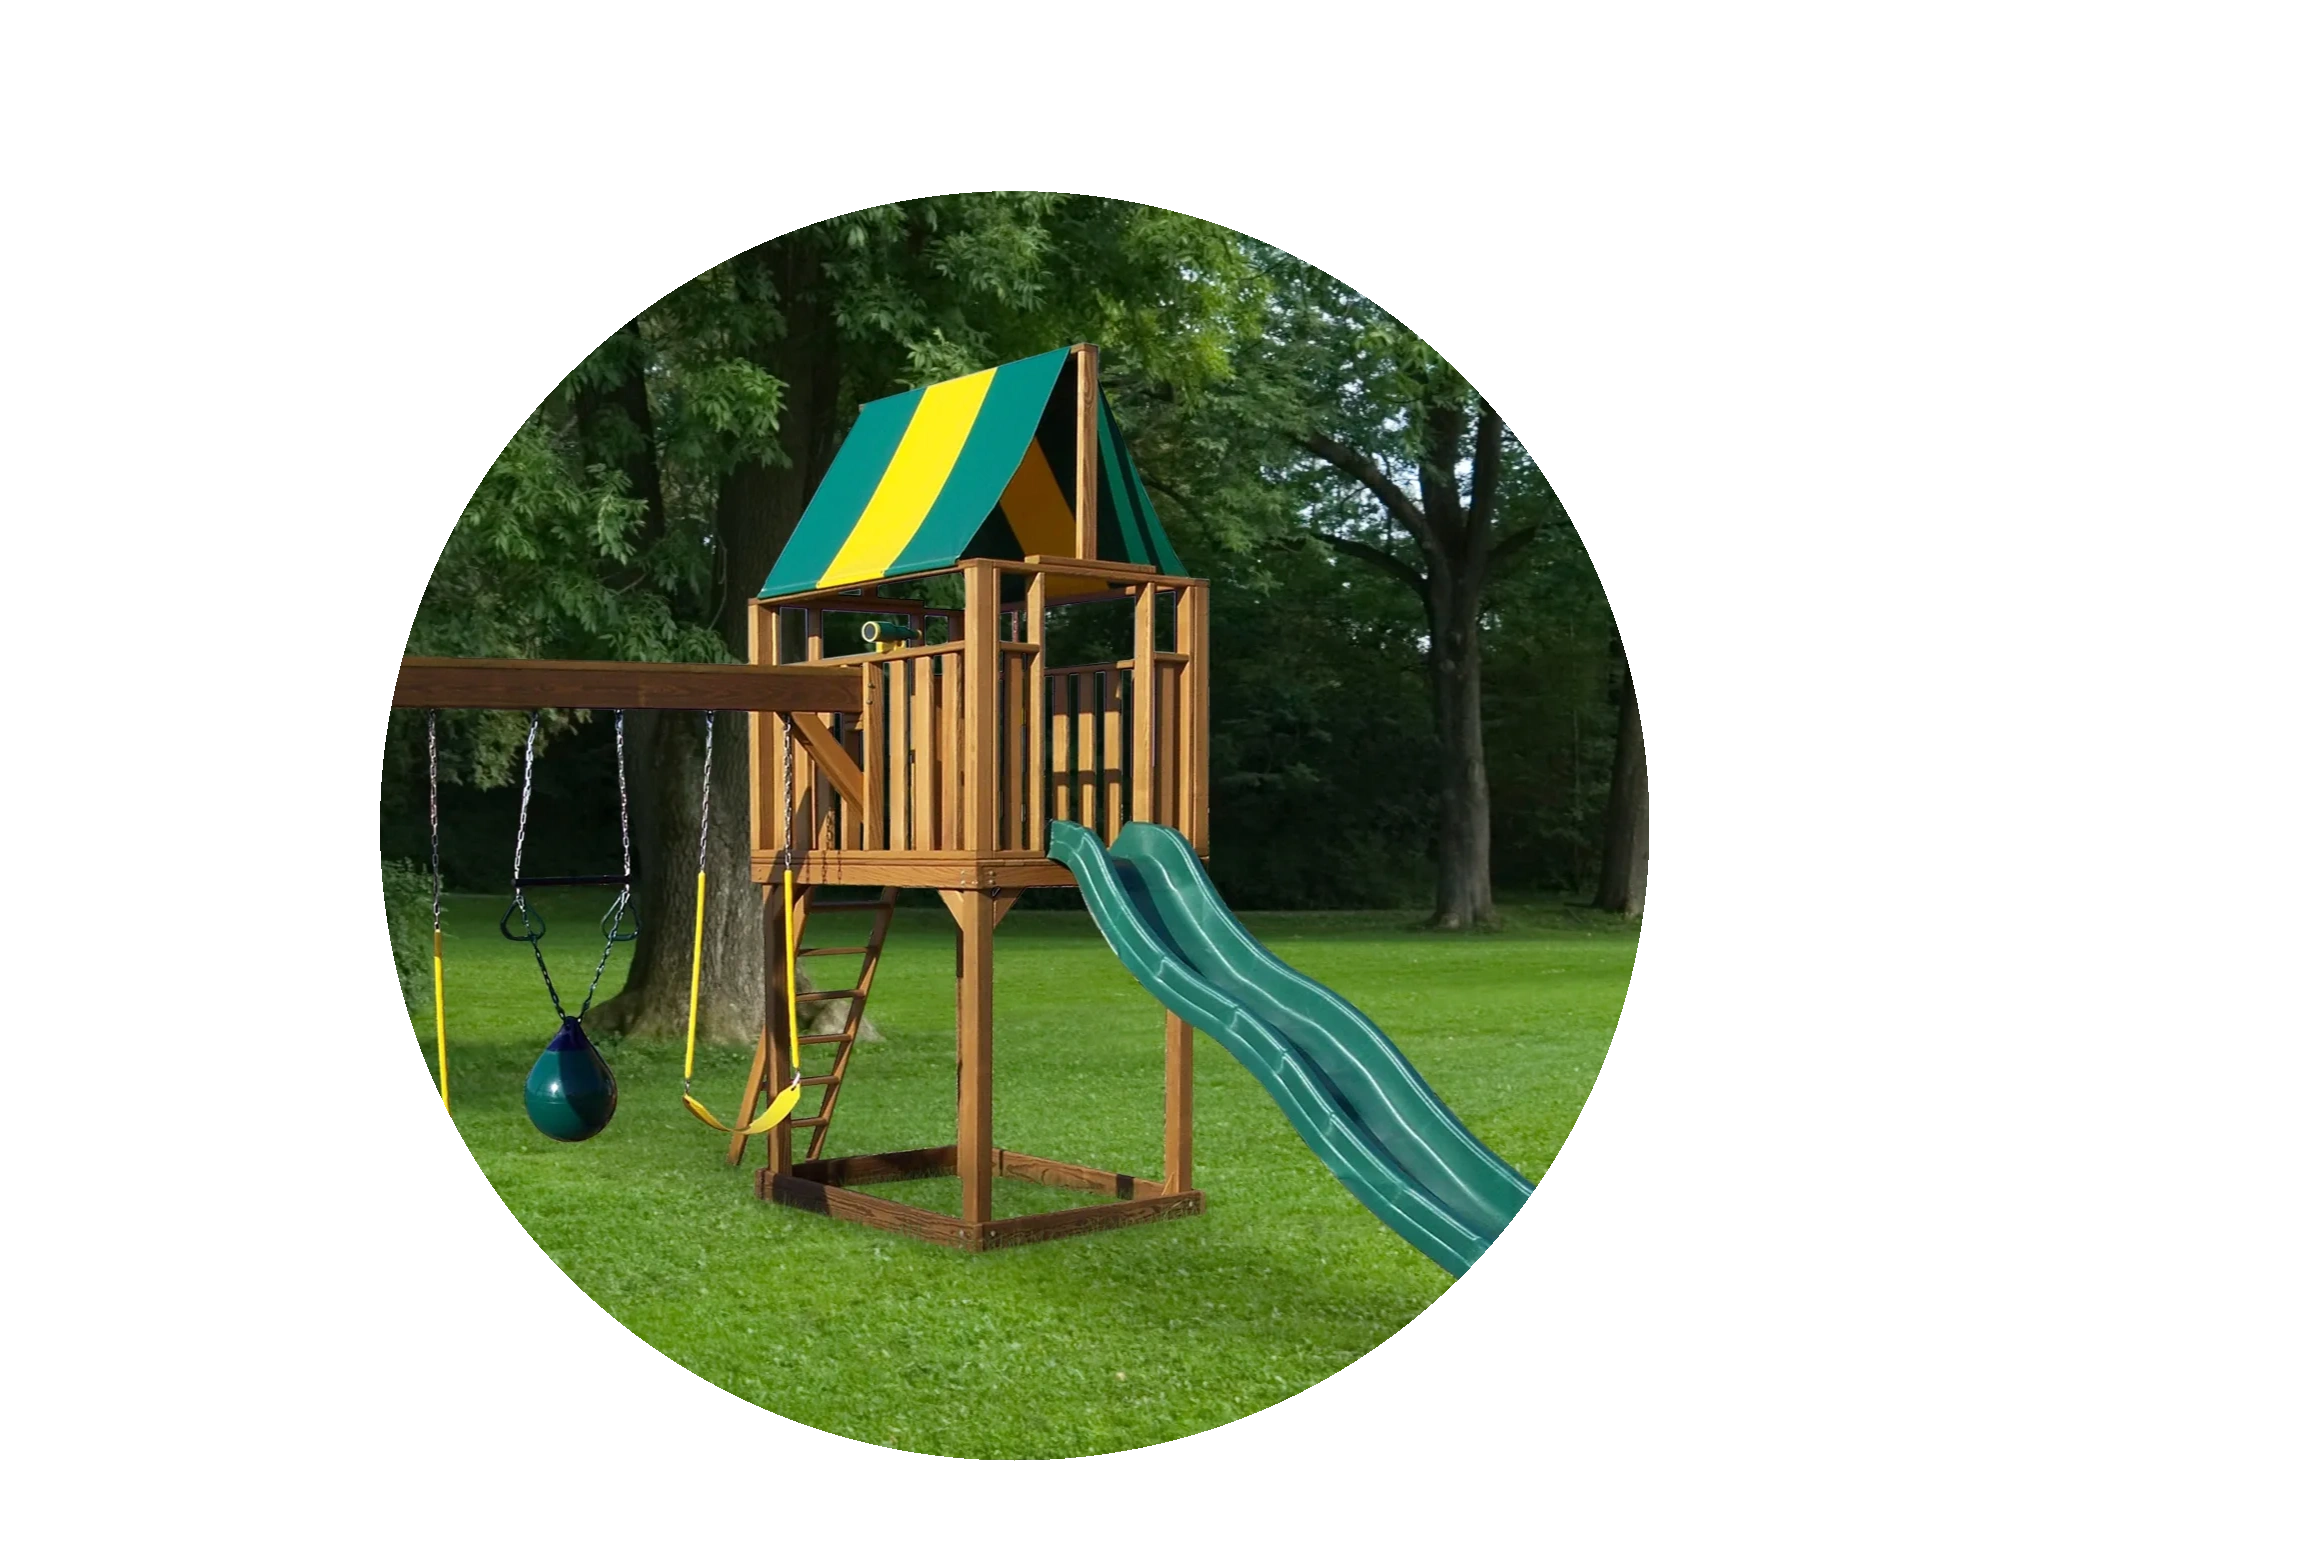 Large single tower wood playset with slide and swings